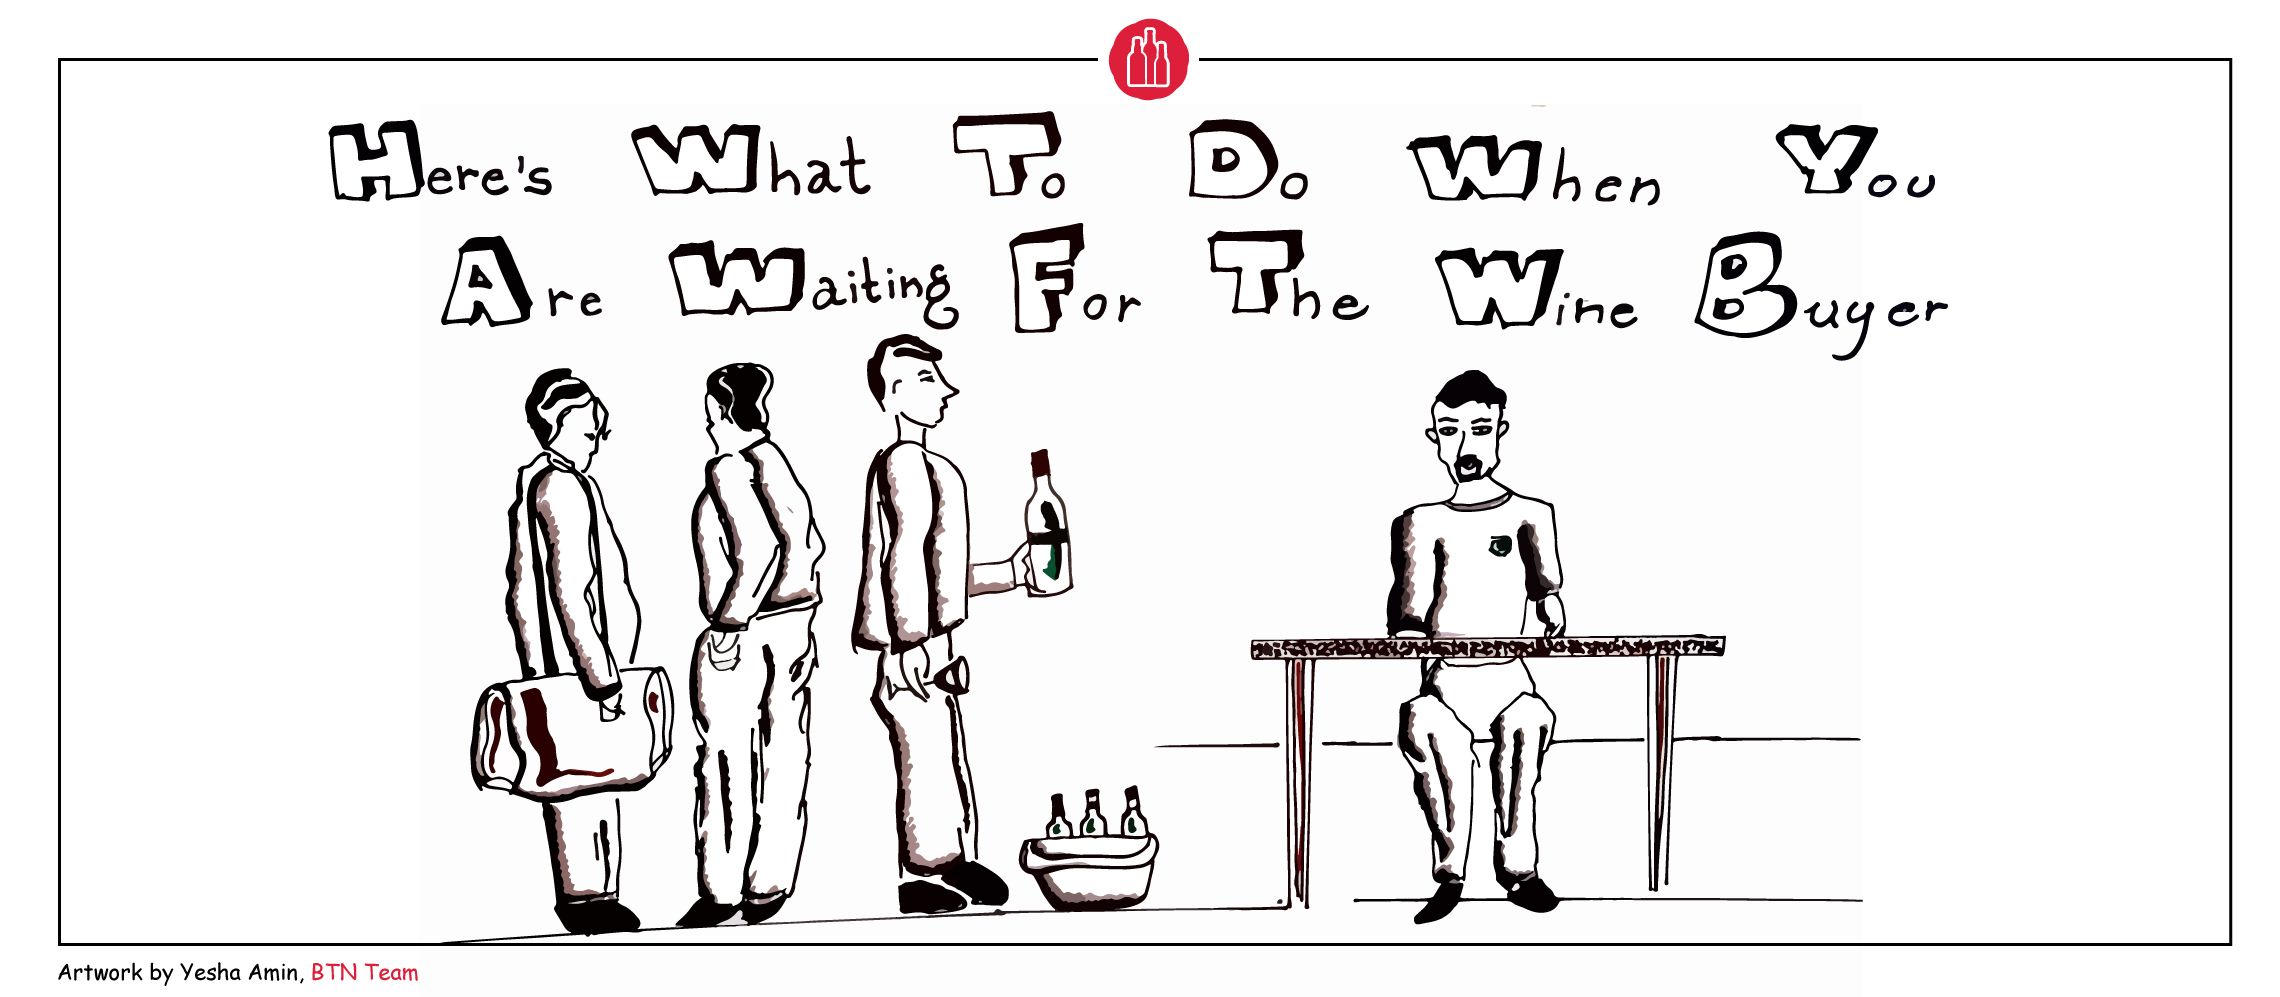 Photo for: What to Do When You're Waiting to See the Wine Buyer